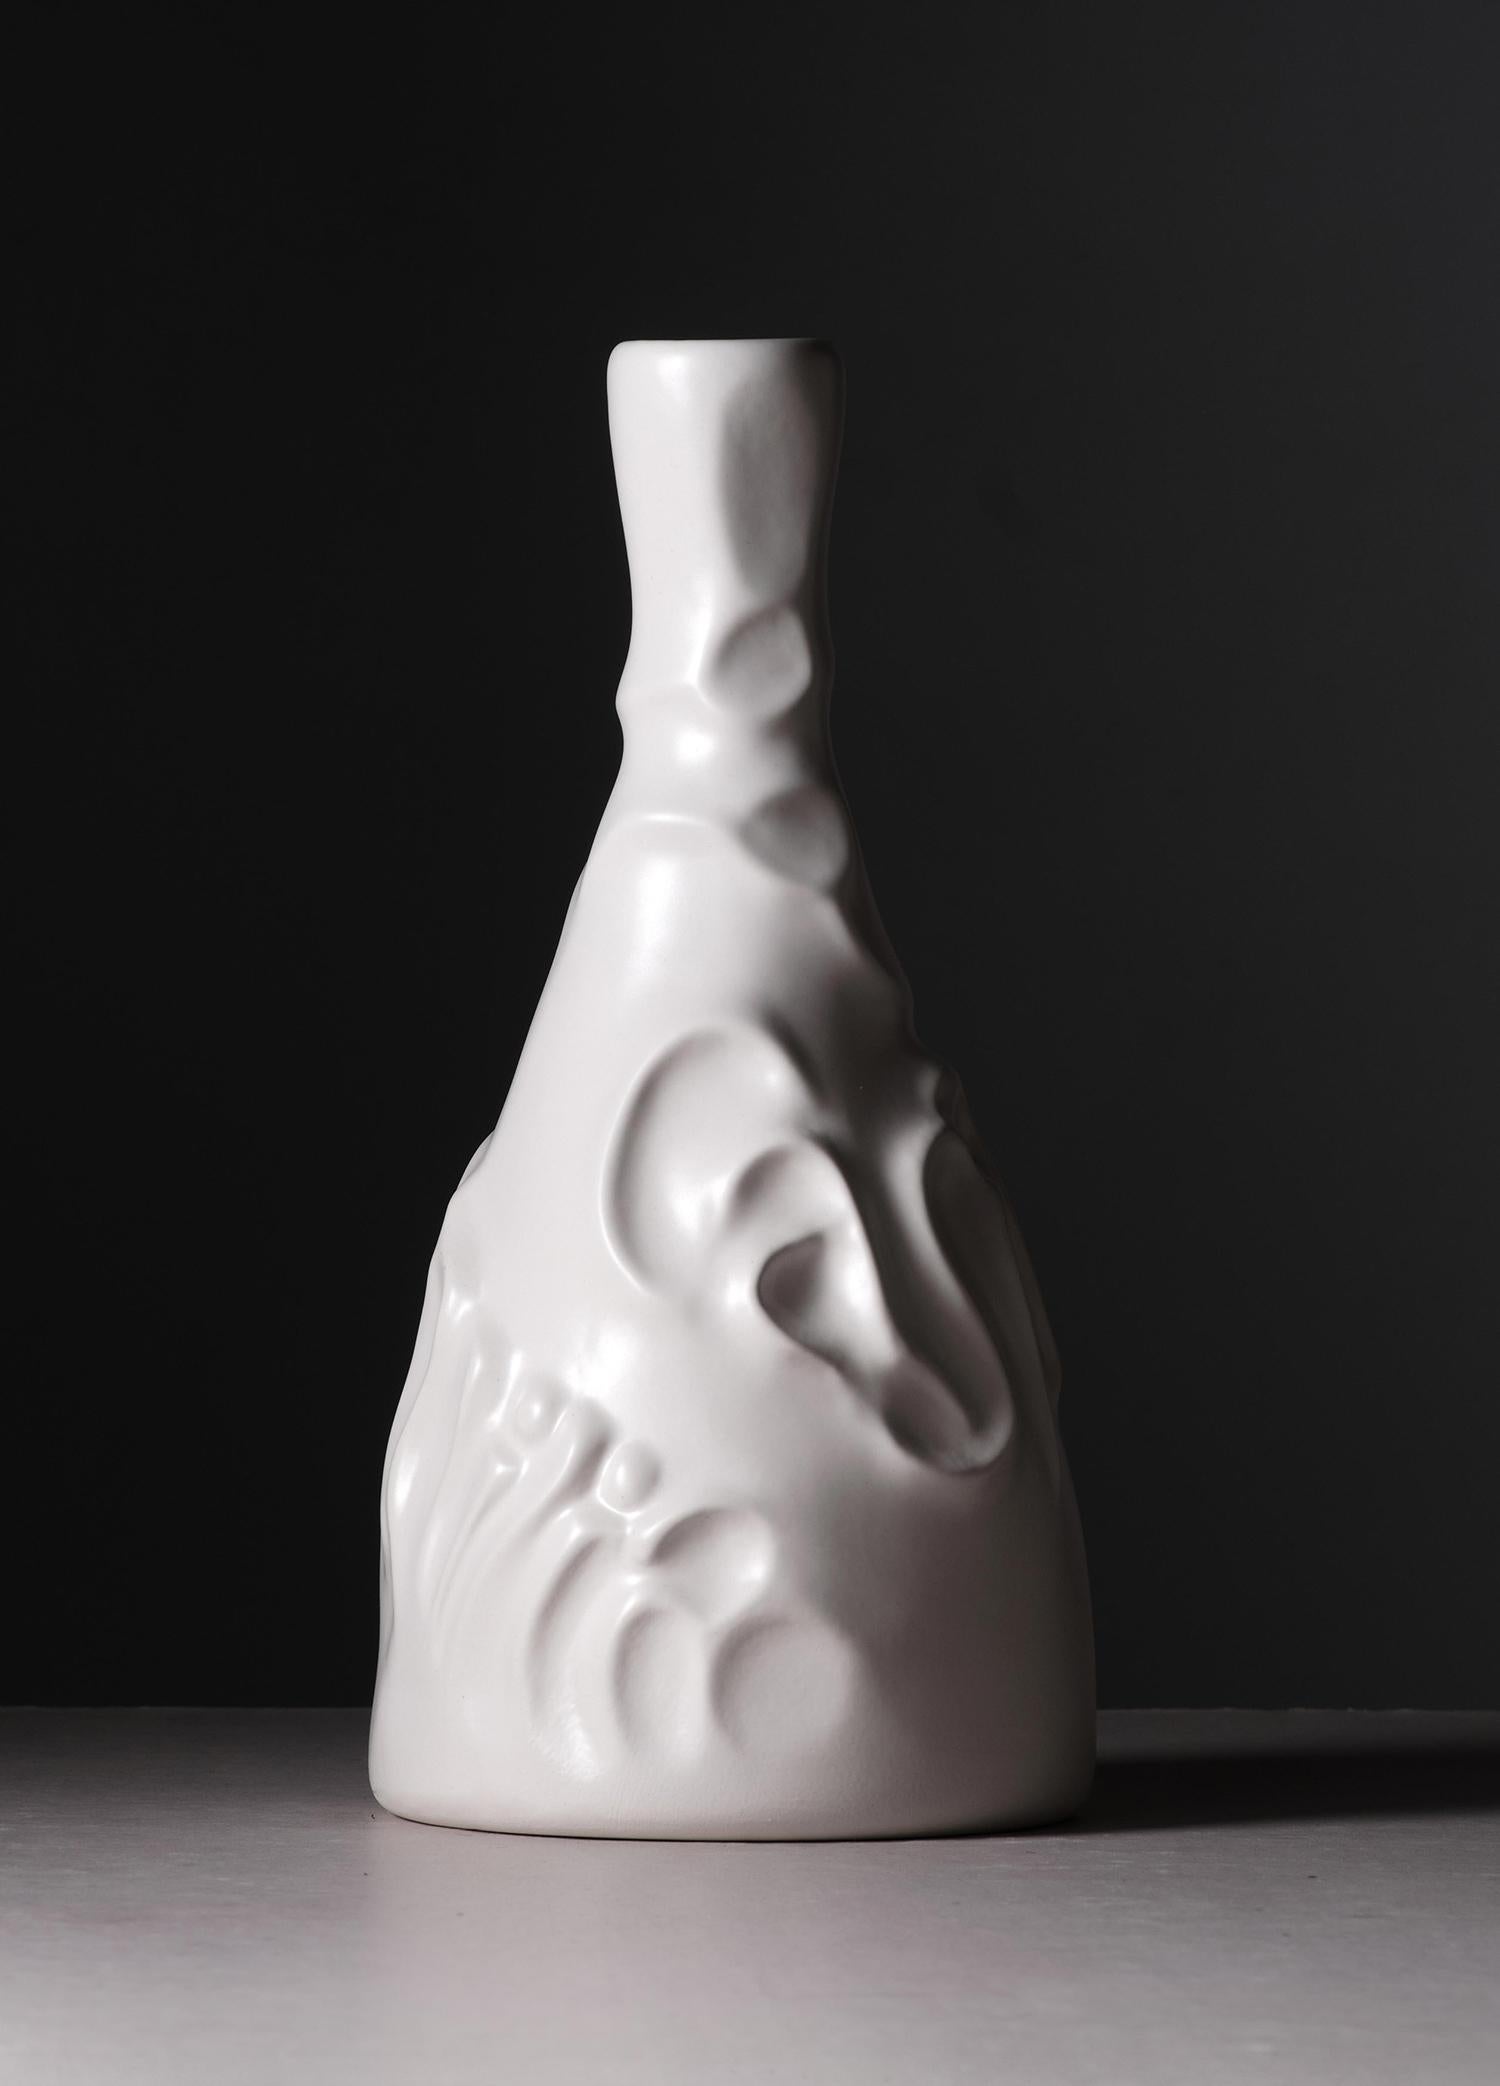 Casa de Familia Ceramic Bottle by Josep Maria Jujol
Dimensions: Ø 14 x H 28 cm.
Materials: Ceramic.

Over a century ago this sculptural bottle was designed in glass. Now, a new, weightier version is reimagined in ceramic.

A new and improved